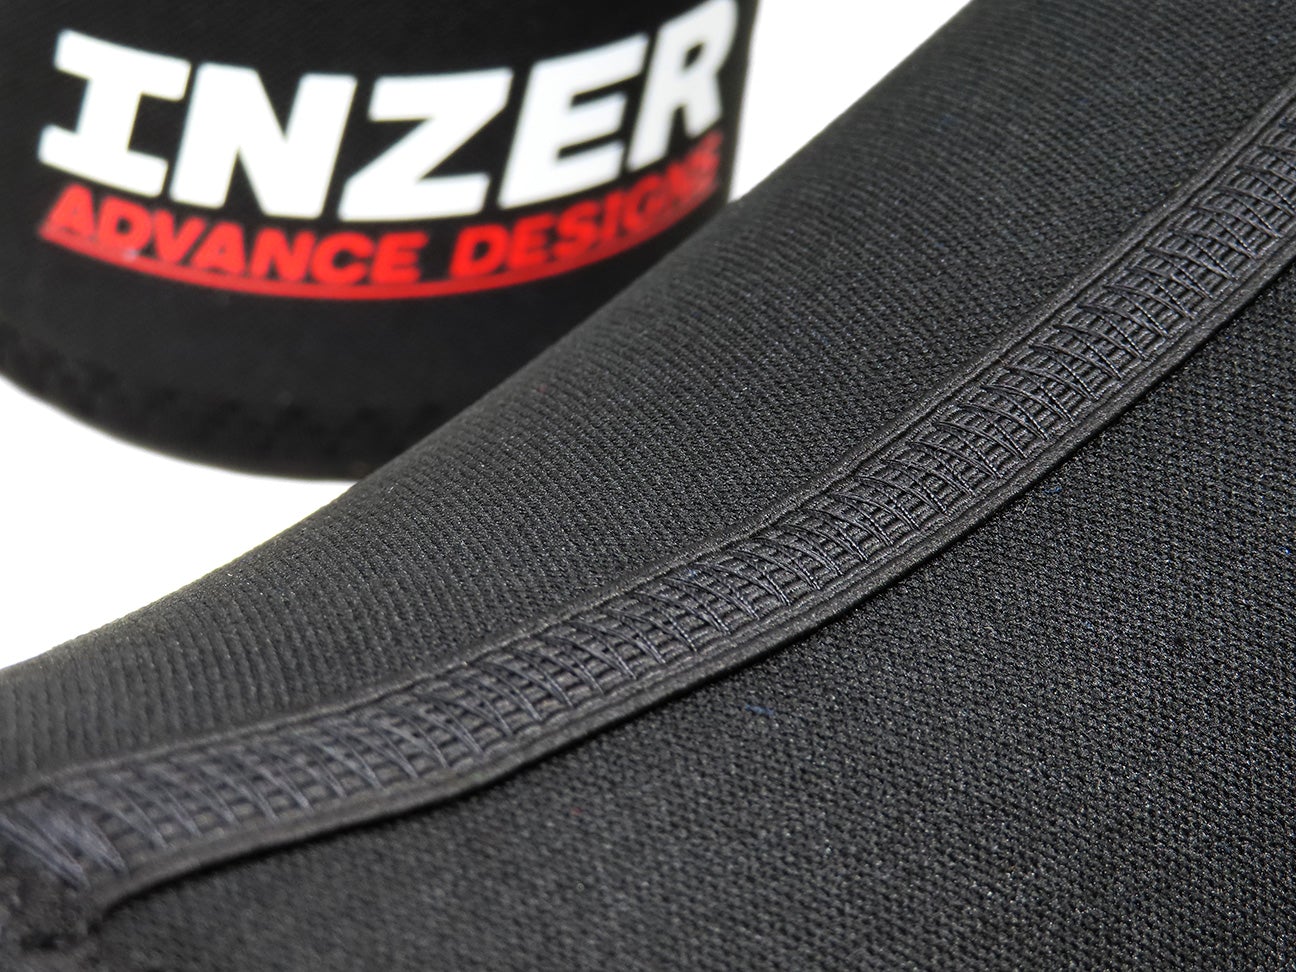 Boost Performance with Inzer ErgoPro Knee Sleeves